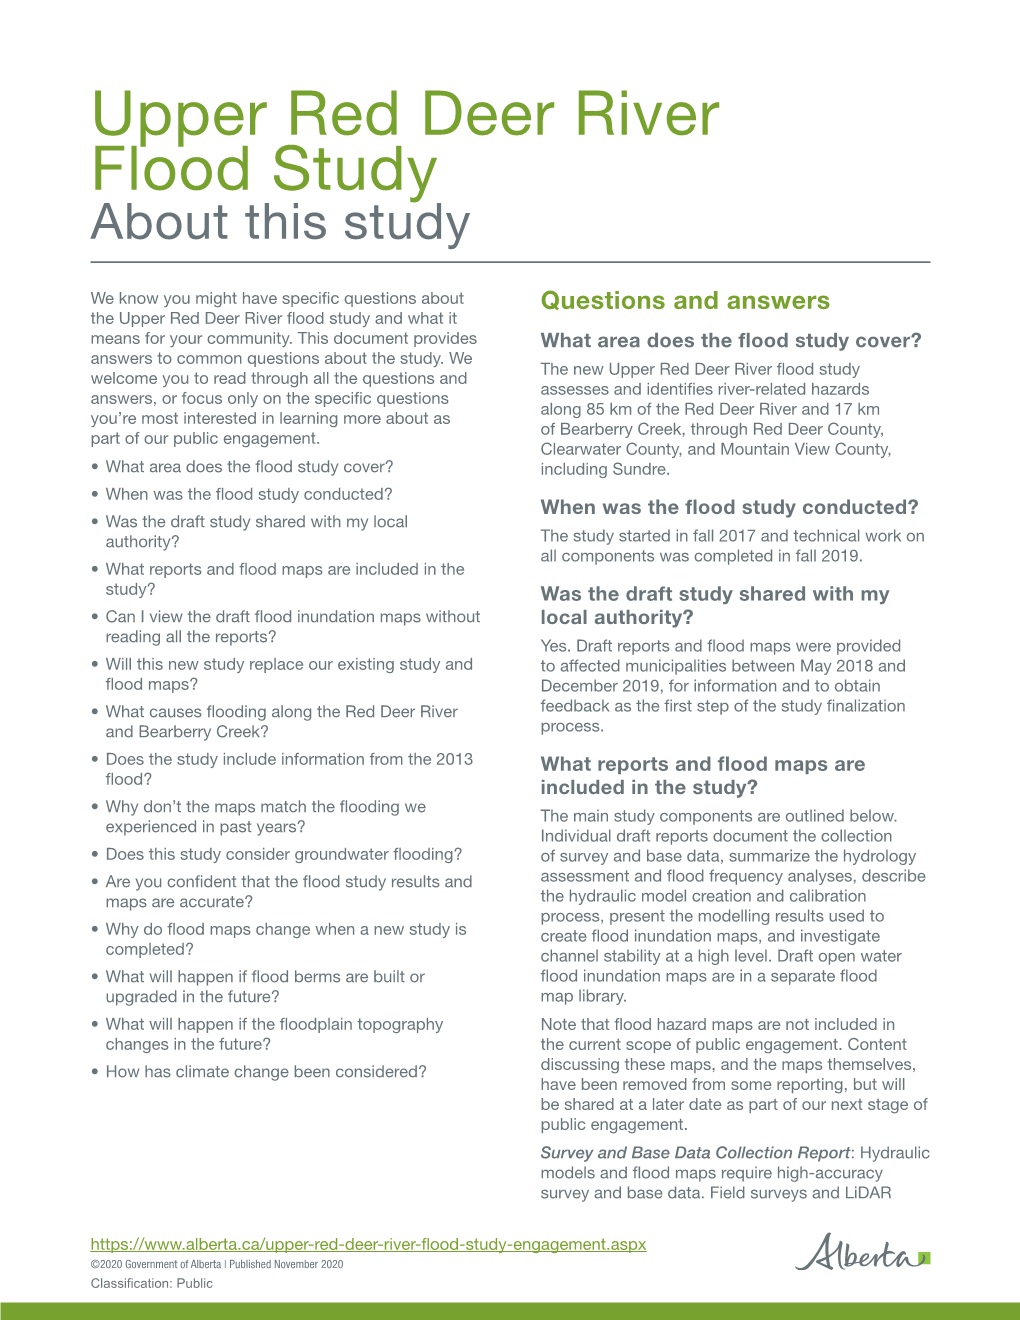 Upper Red Deer River Flood Study About This Study